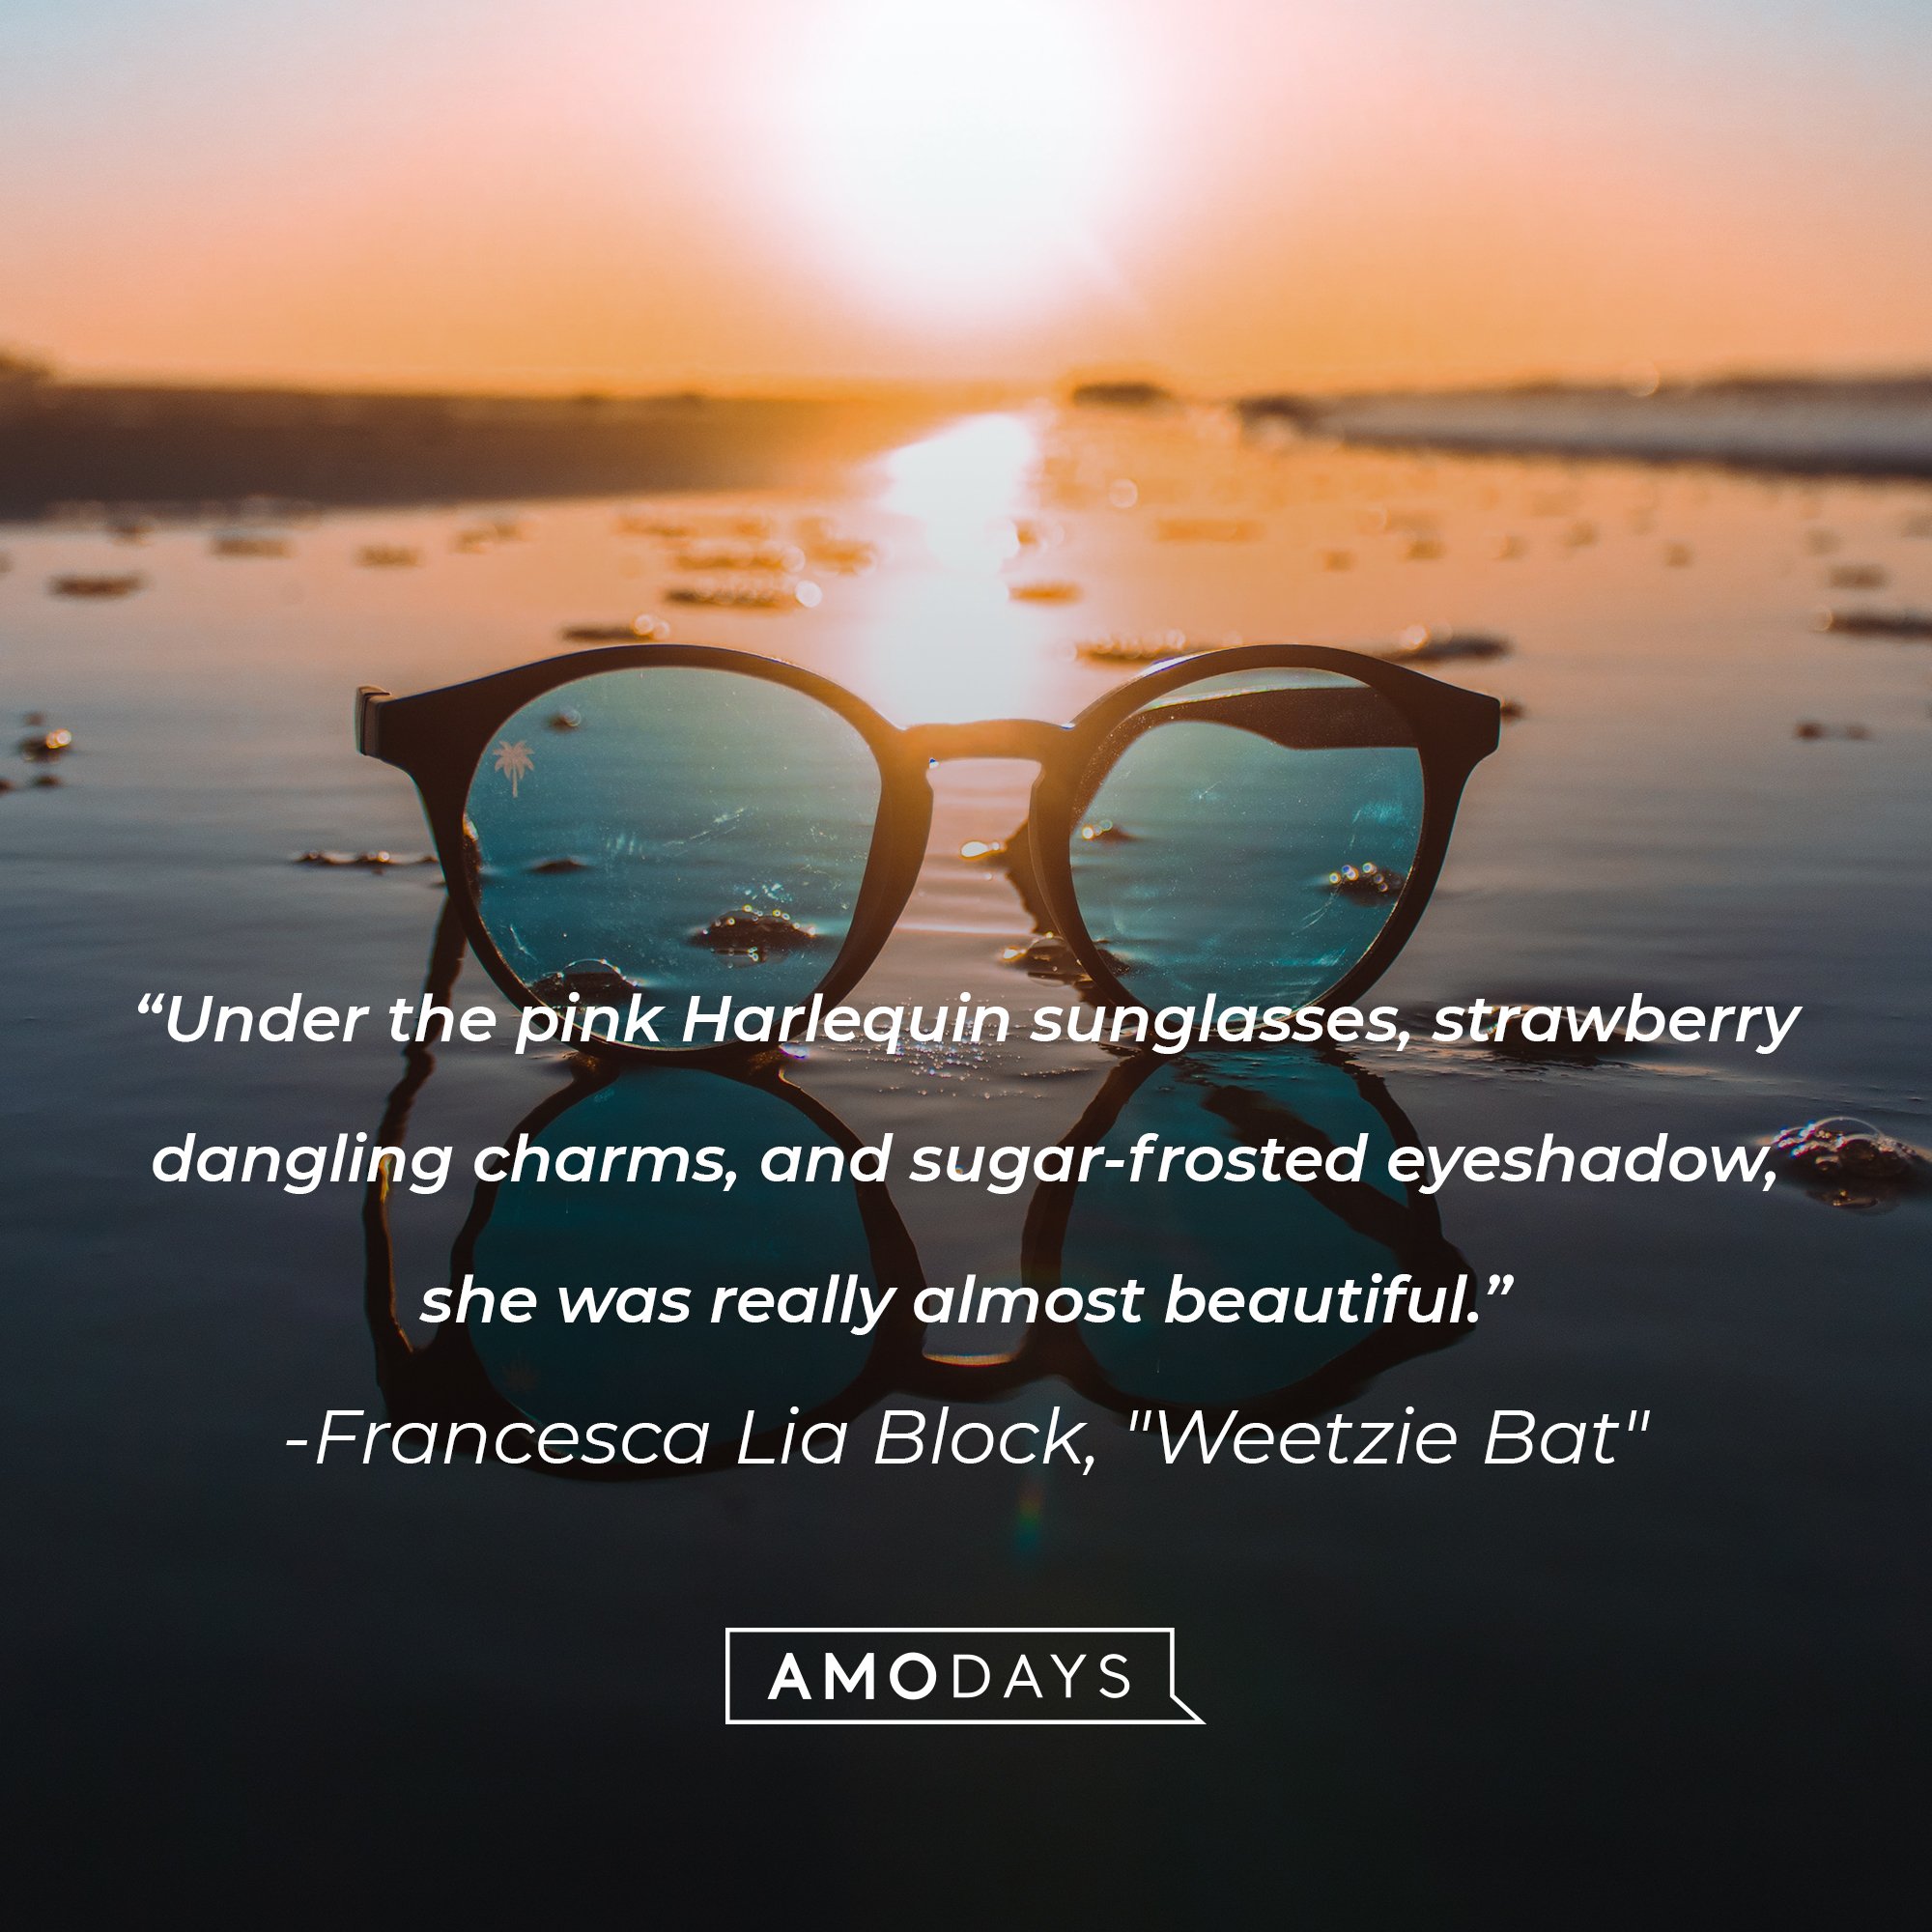 Francesca Lia Block’s quote from "Weetzie Bat": “Under the pink Harlequin sunglasses, strawberry dangling charms, and sugar-frosted eyeshadow, she was really almost beautiful." | Image: AmoDays  